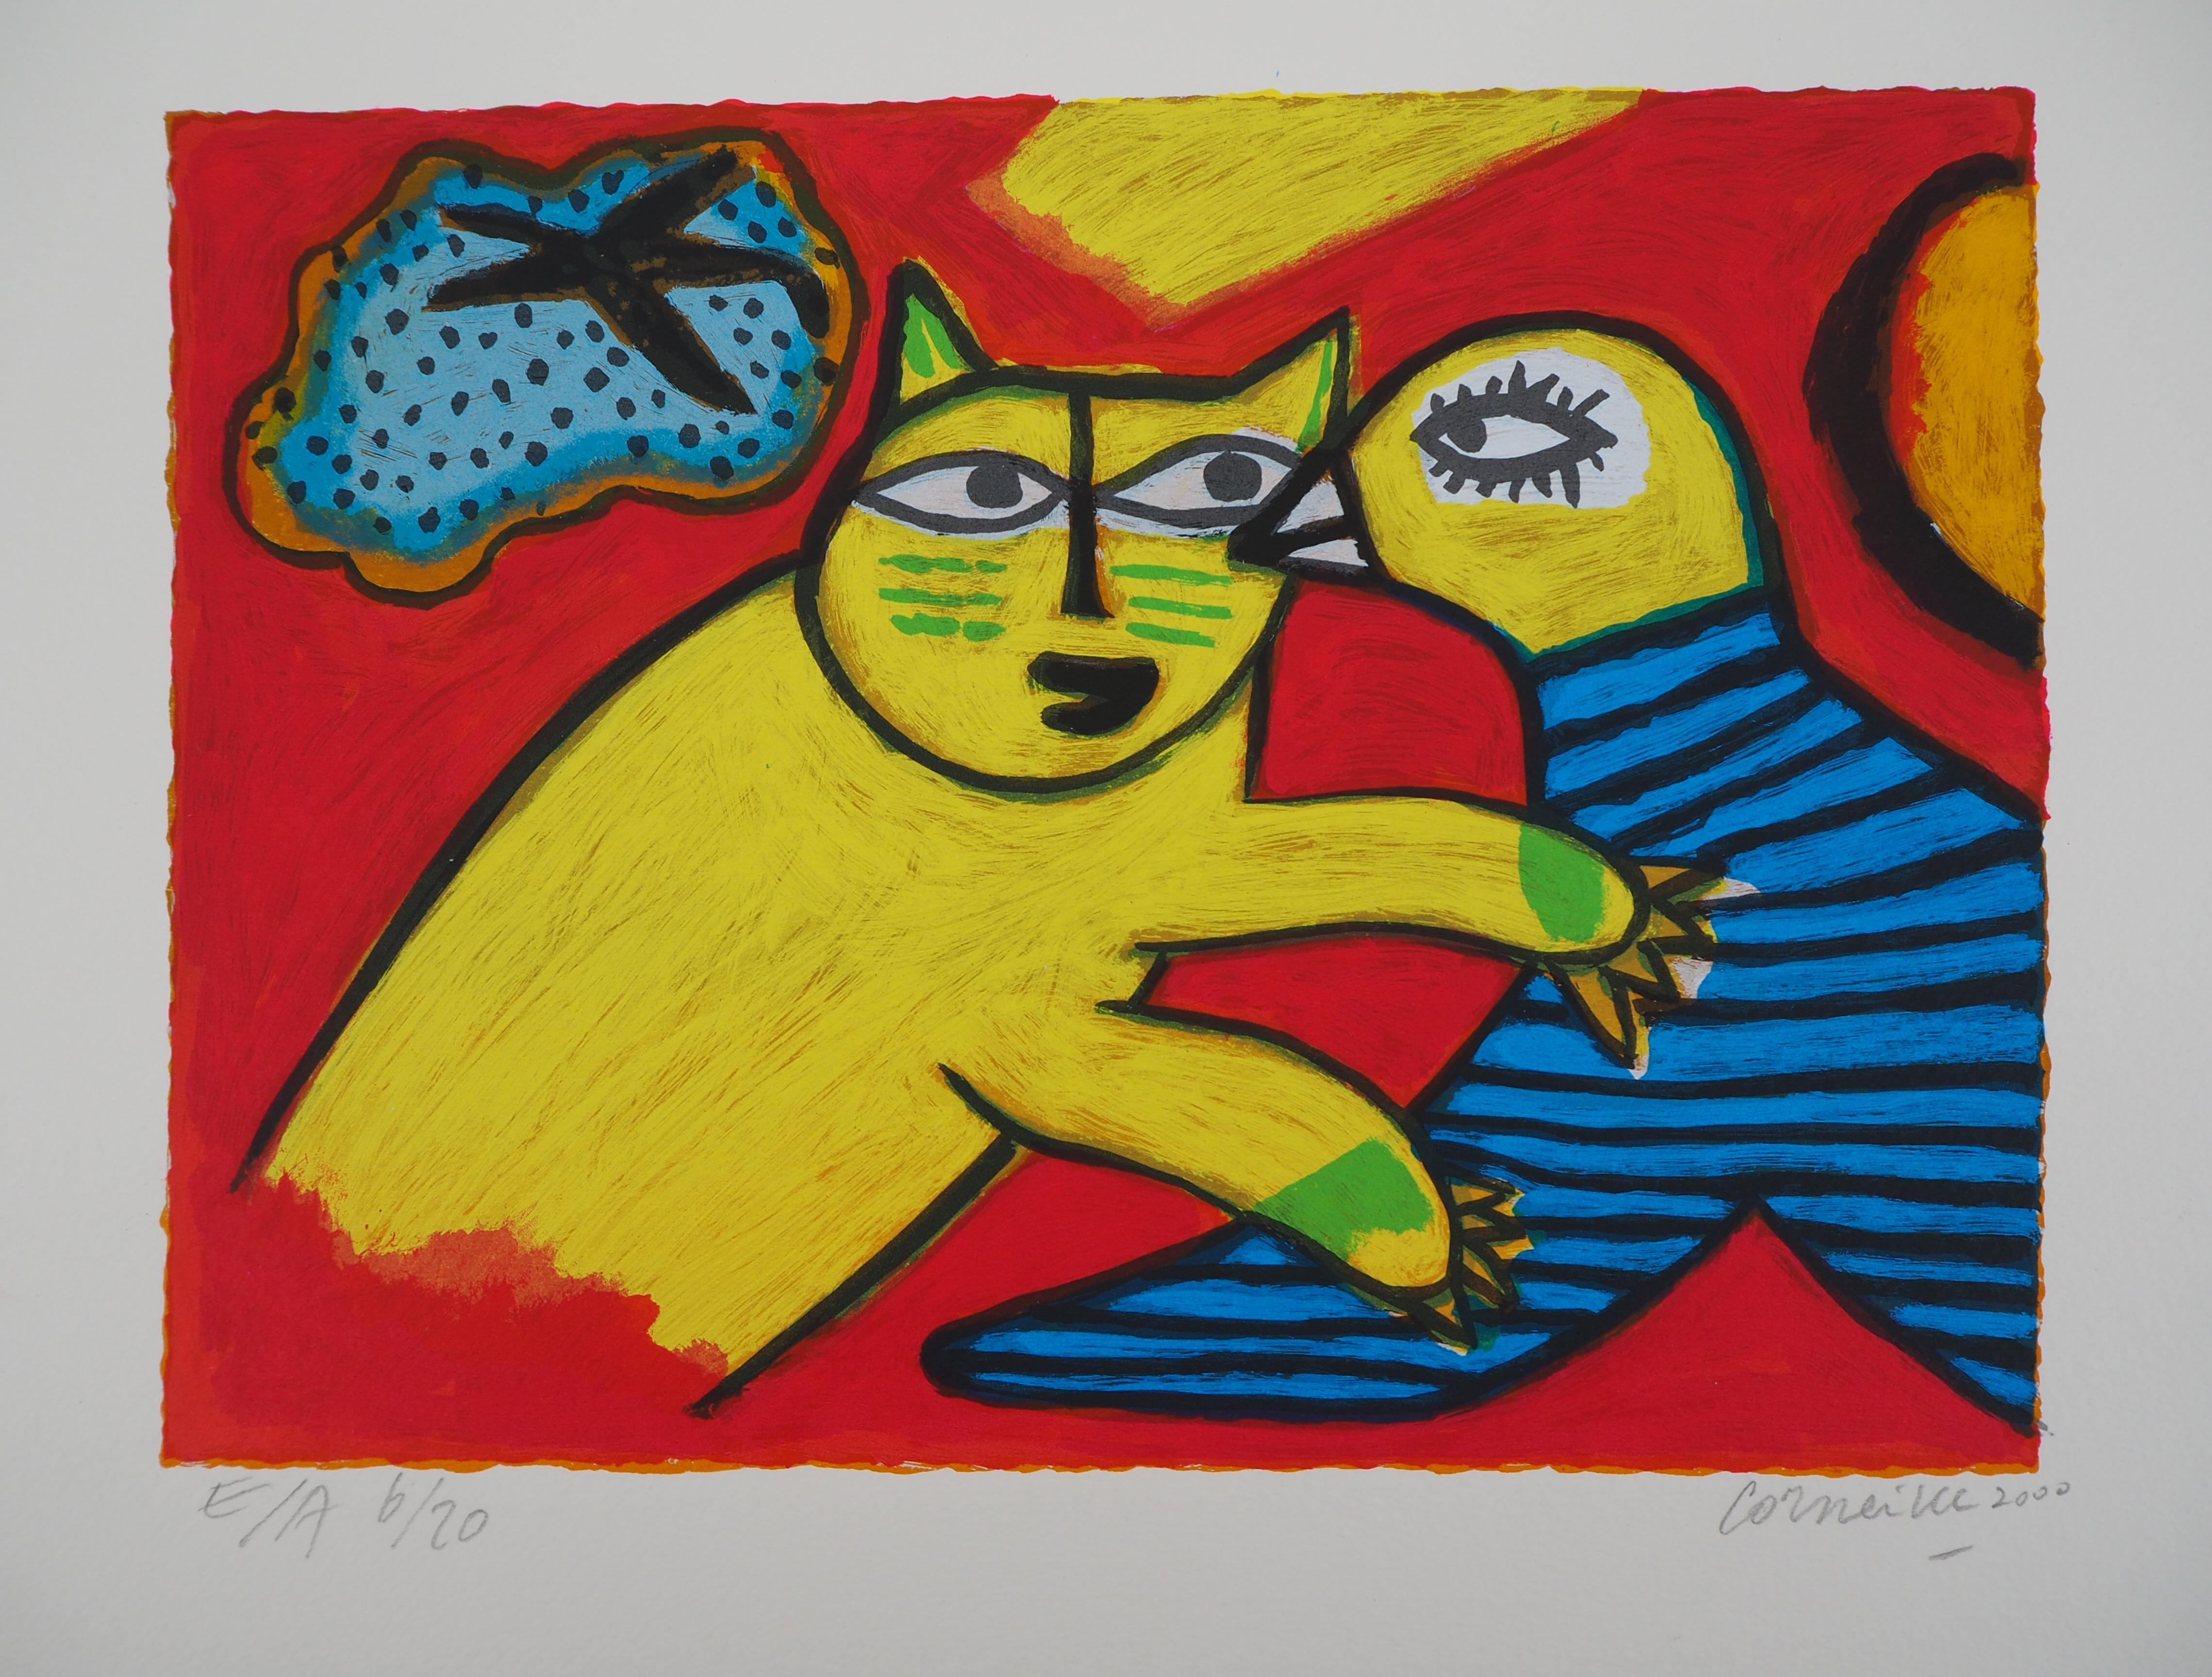 Cat and Bird in Love - Original handsigned lithograph - Surrealist Print by Corneille